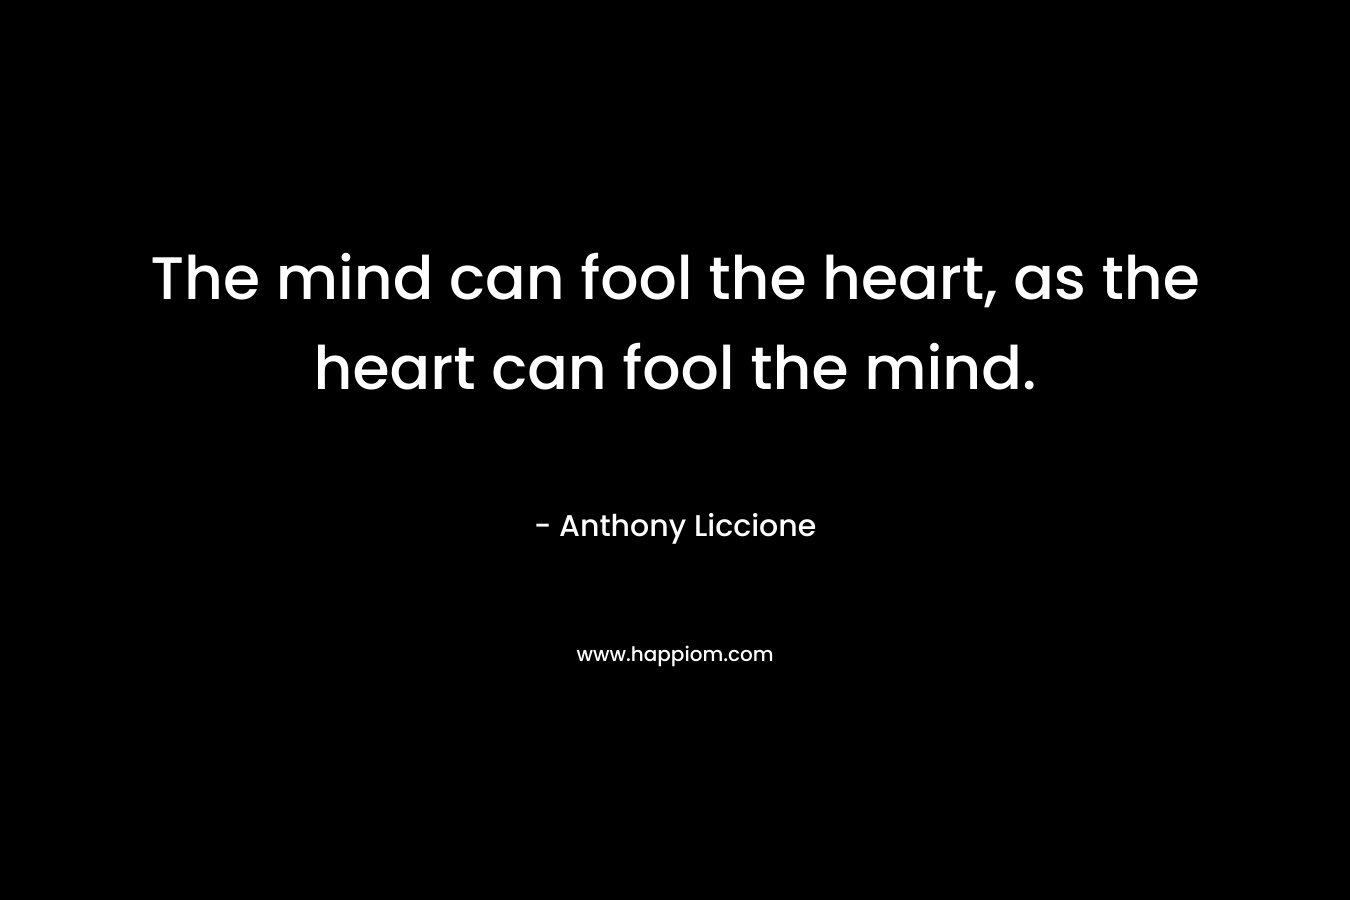 The mind can fool the heart, as the heart can fool the mind.